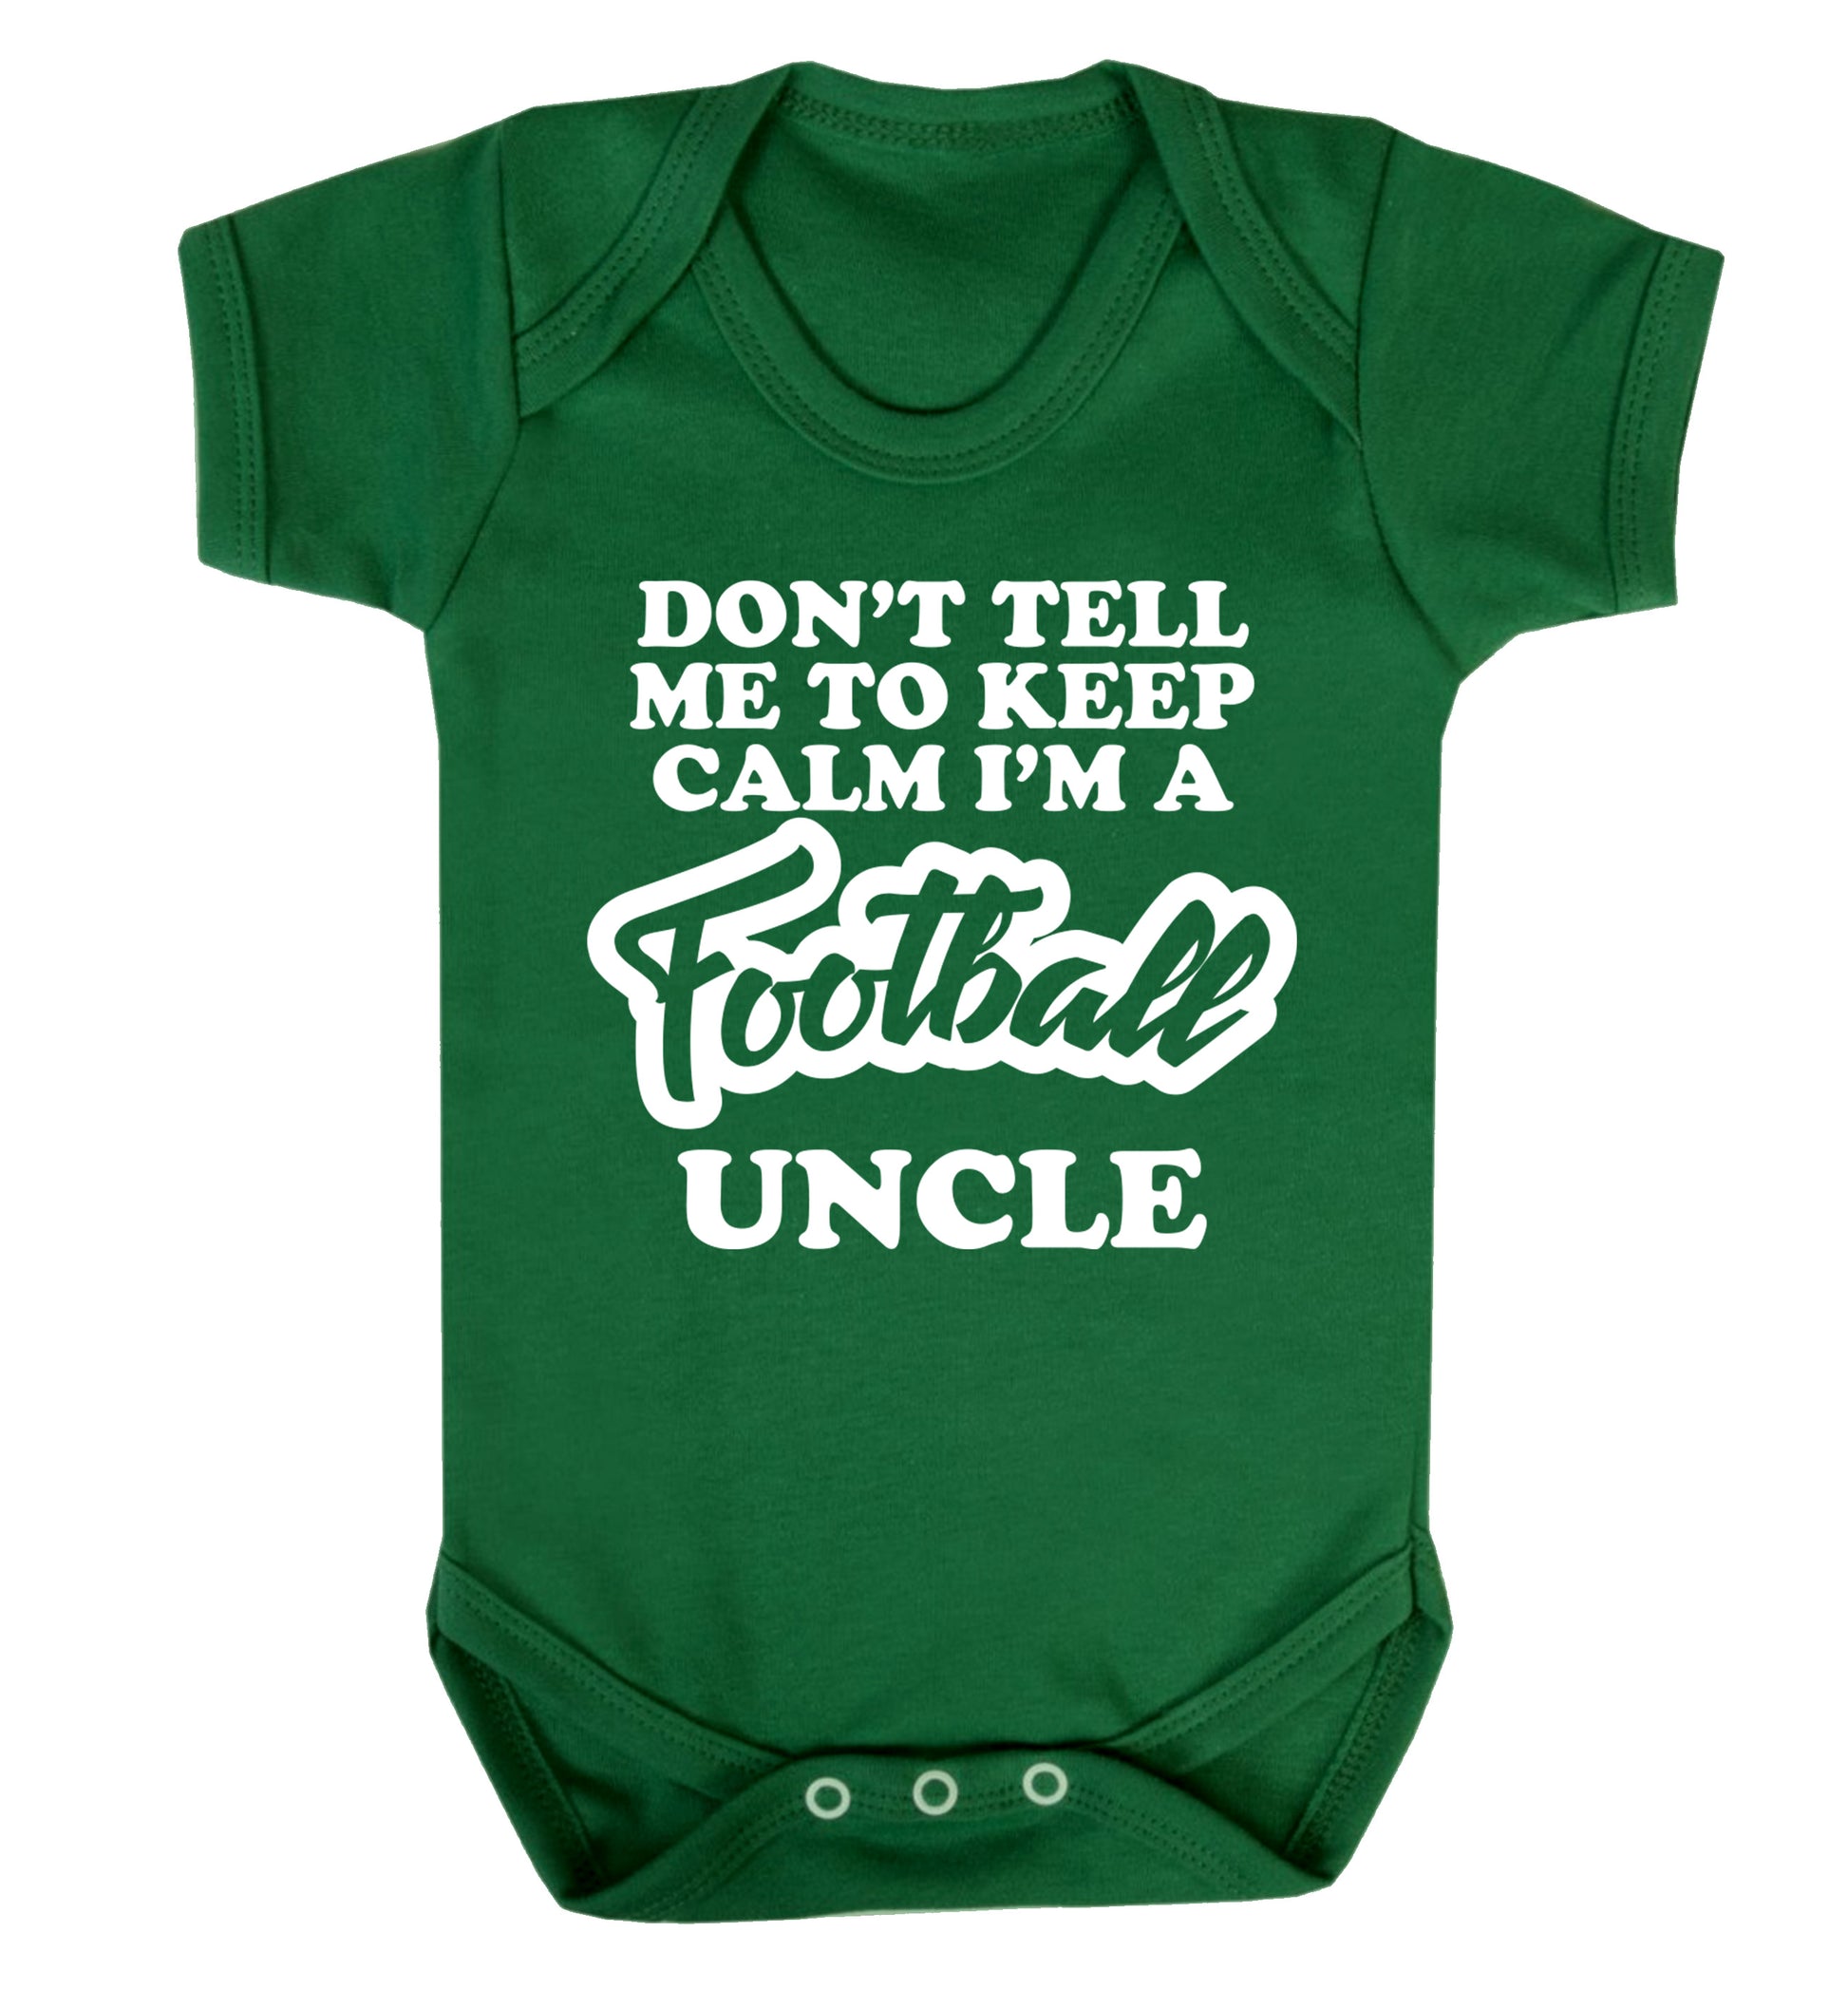 Don't tell me to keep calm I'm a football uncle Baby Vest green 18-24 months